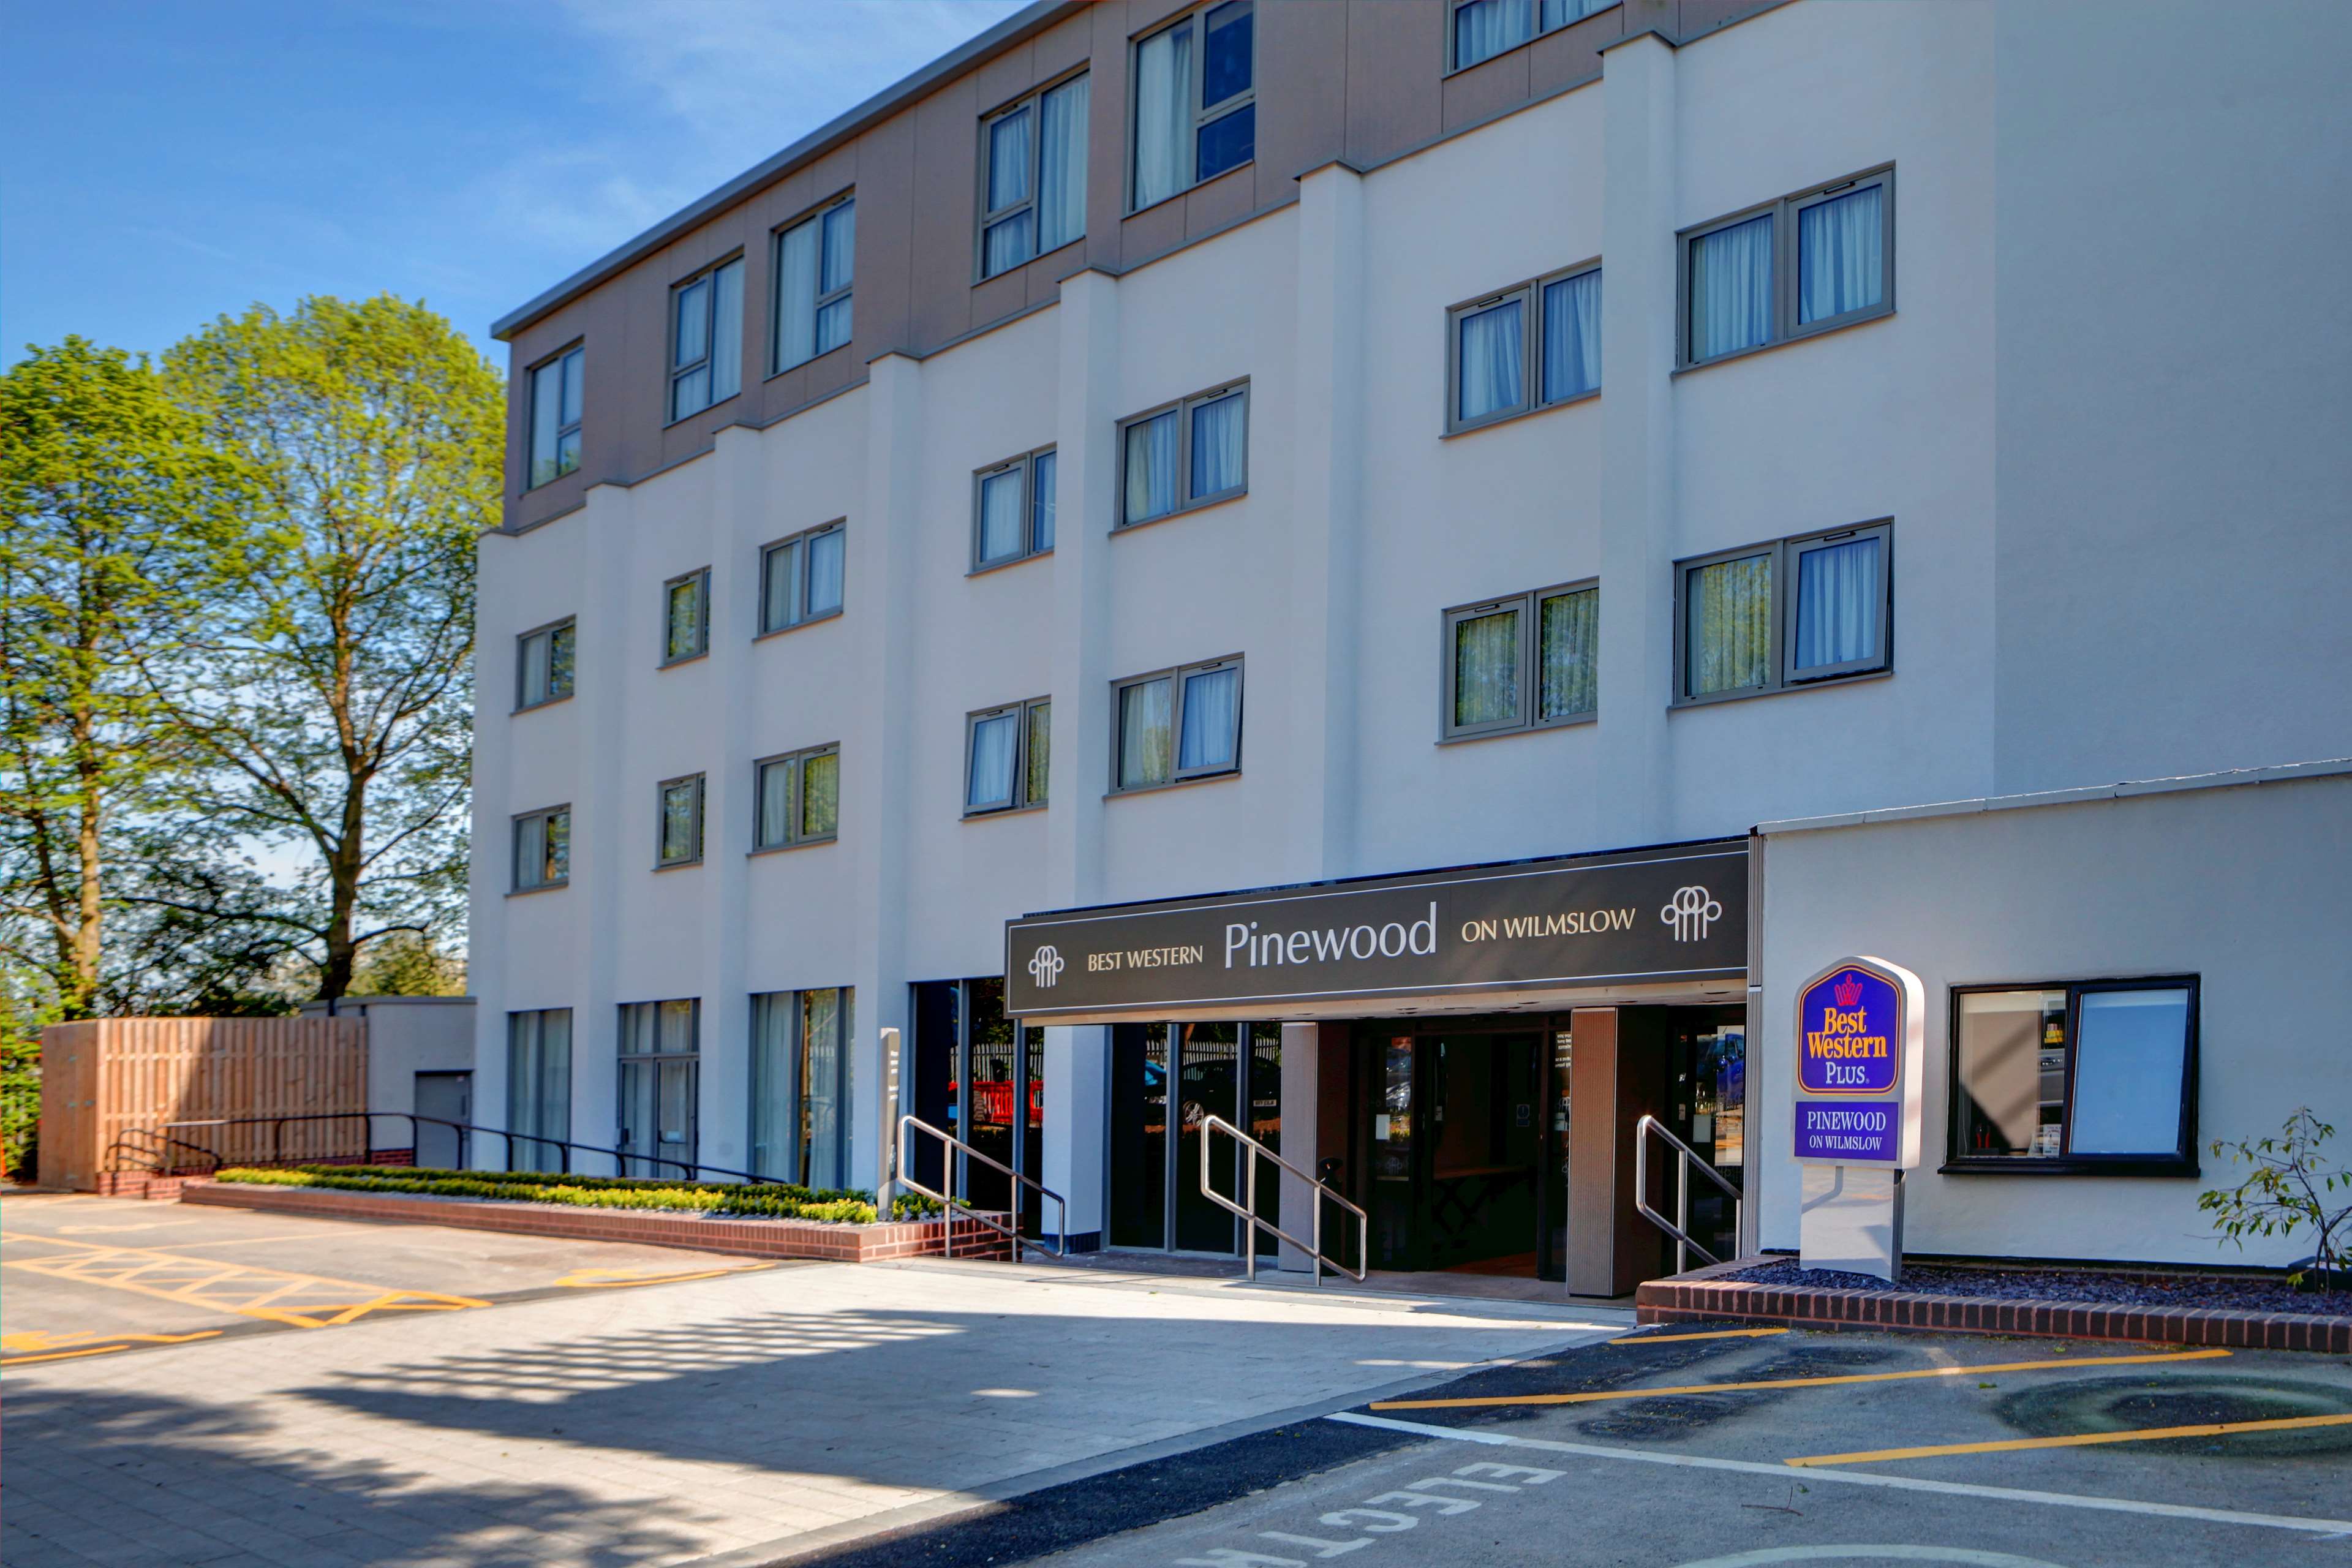 Best Western Plus Manchester Airport Wilmslow Pinewood Hotel - Hotels